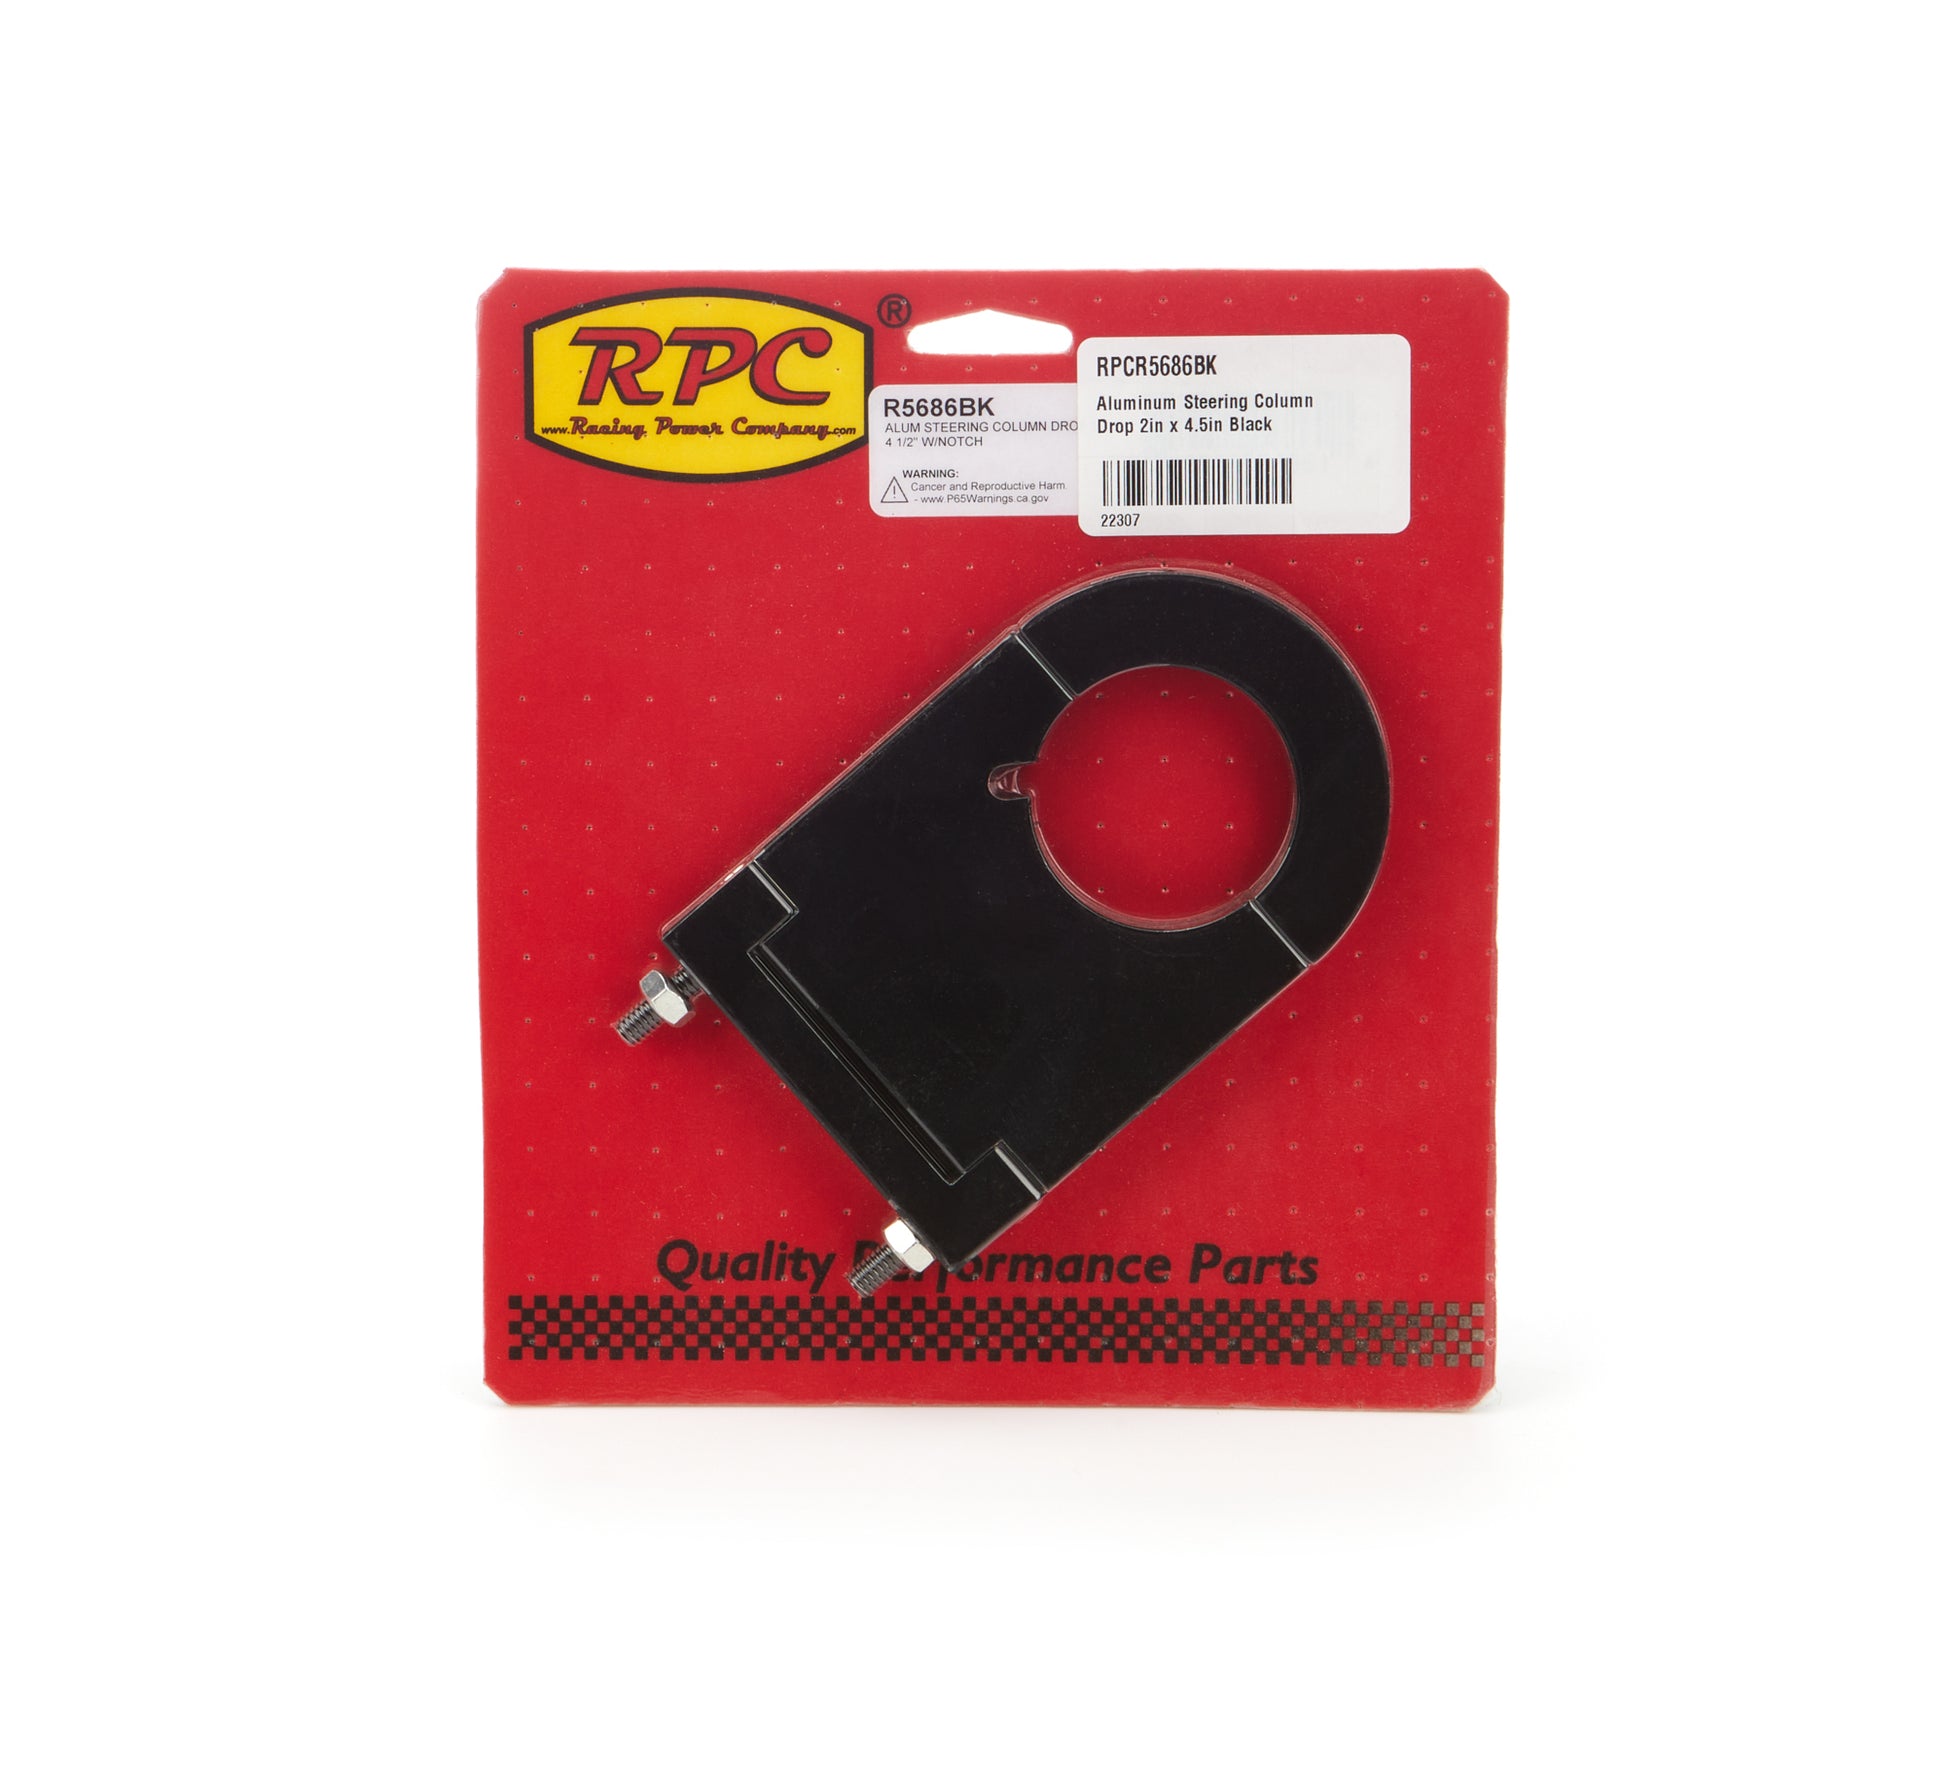 R5686BK RACING POWER CO-PACKAGED